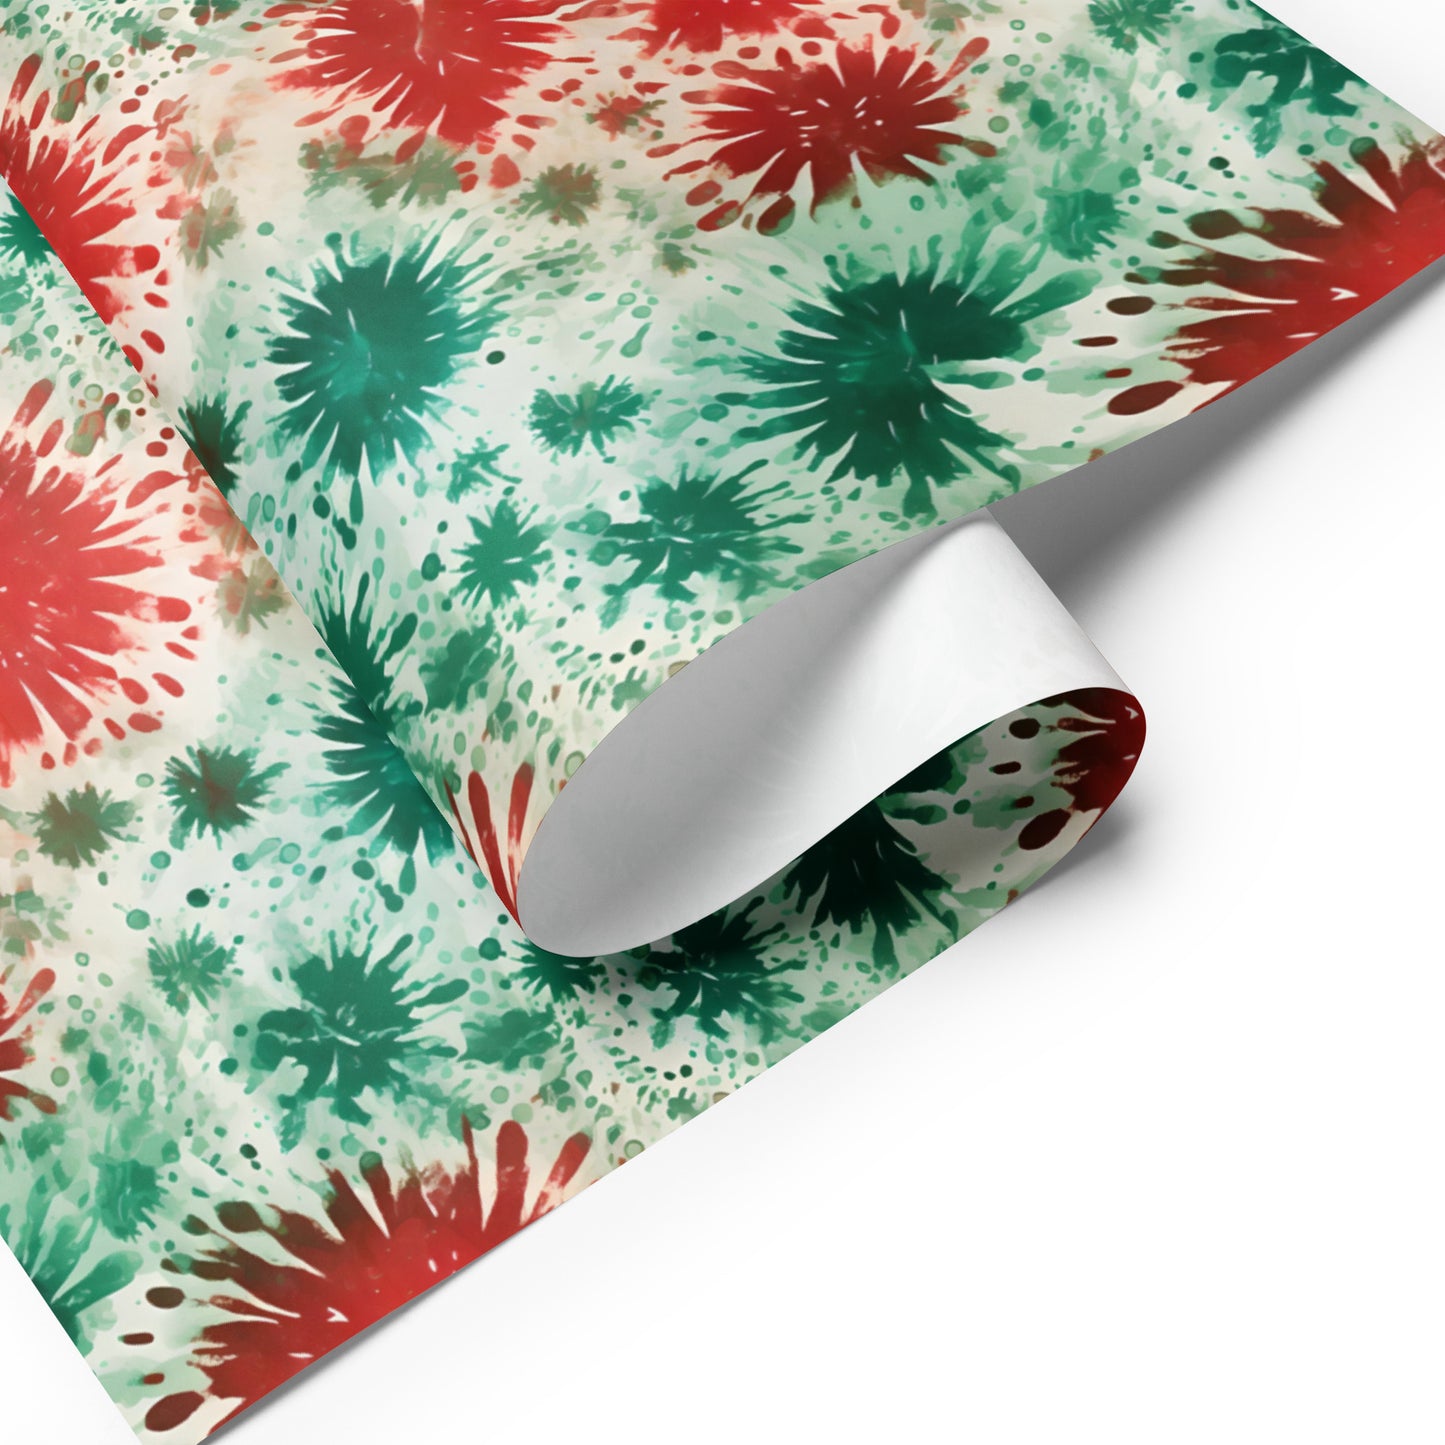 Red and Green Tie Dye Wrapping Paper Sheets